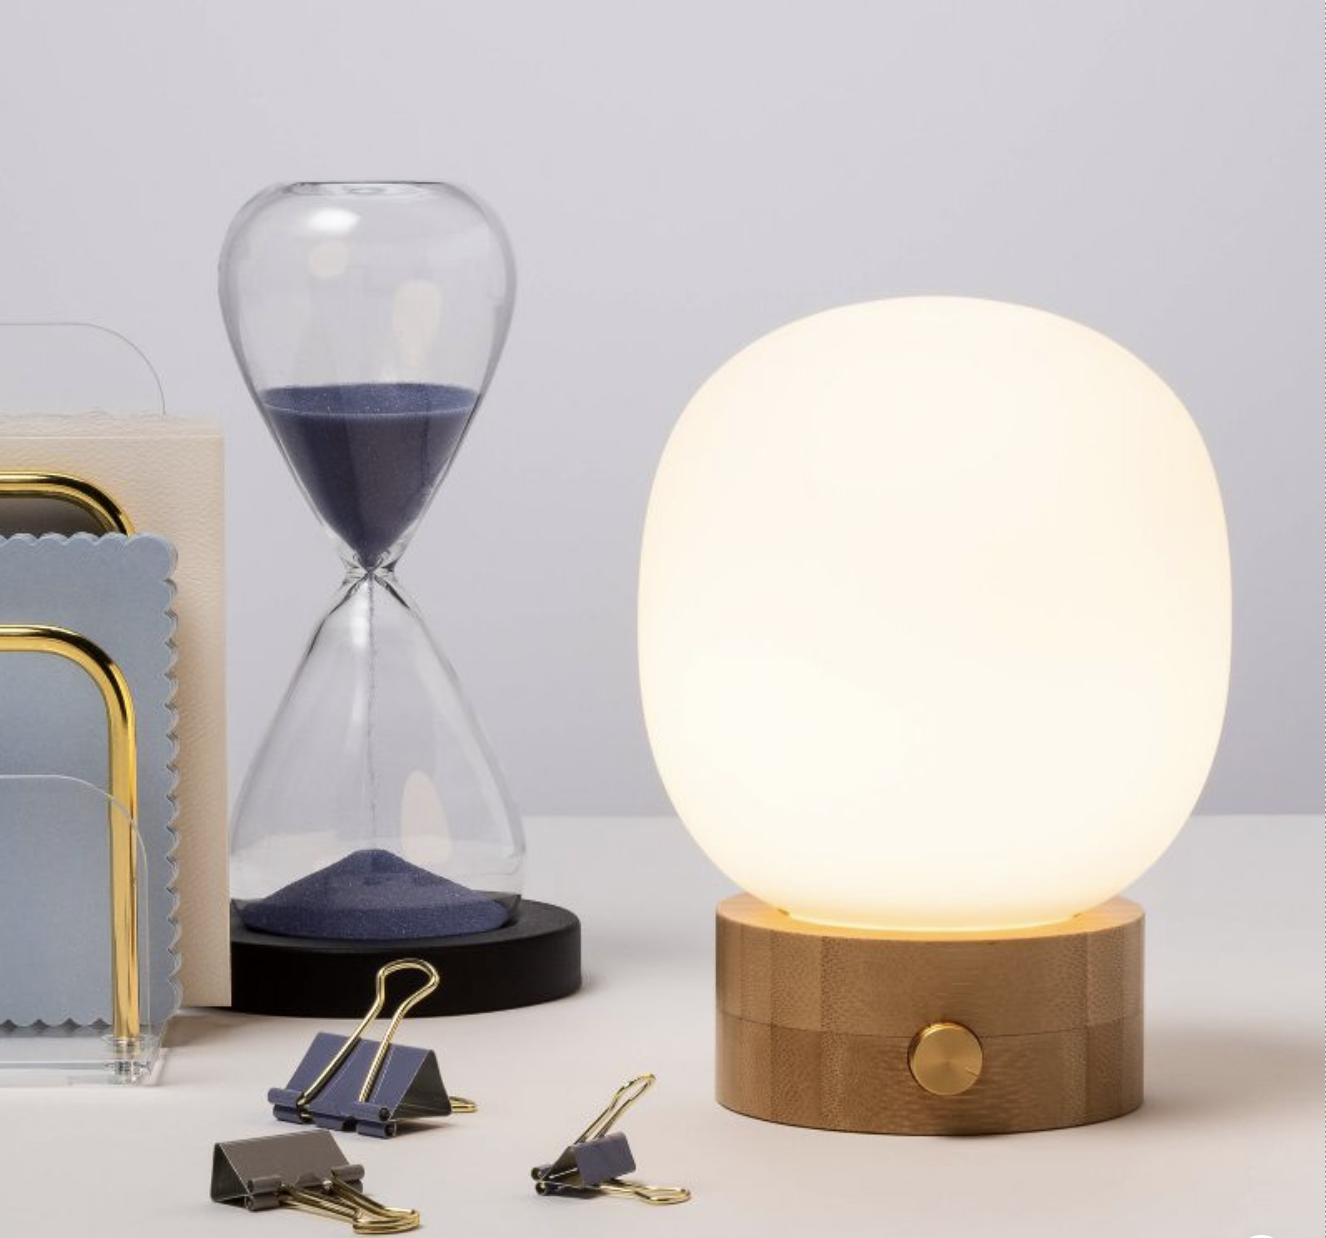 A modern table lamp with a frosted dome top and brass knob